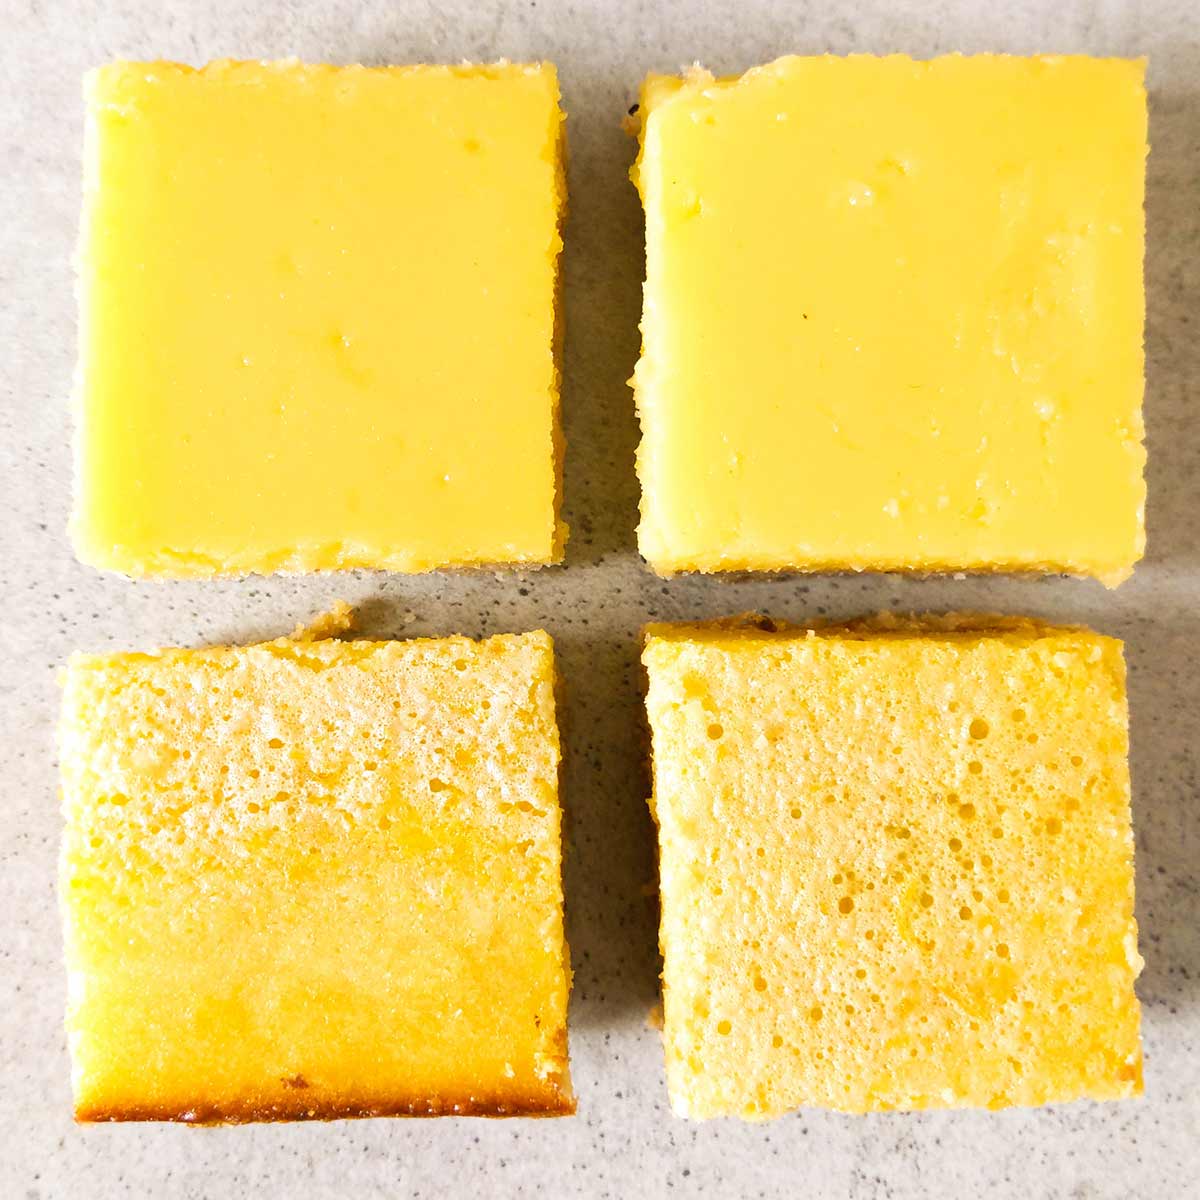 Lemon bar fillings, from silky smooth to bubbles on top